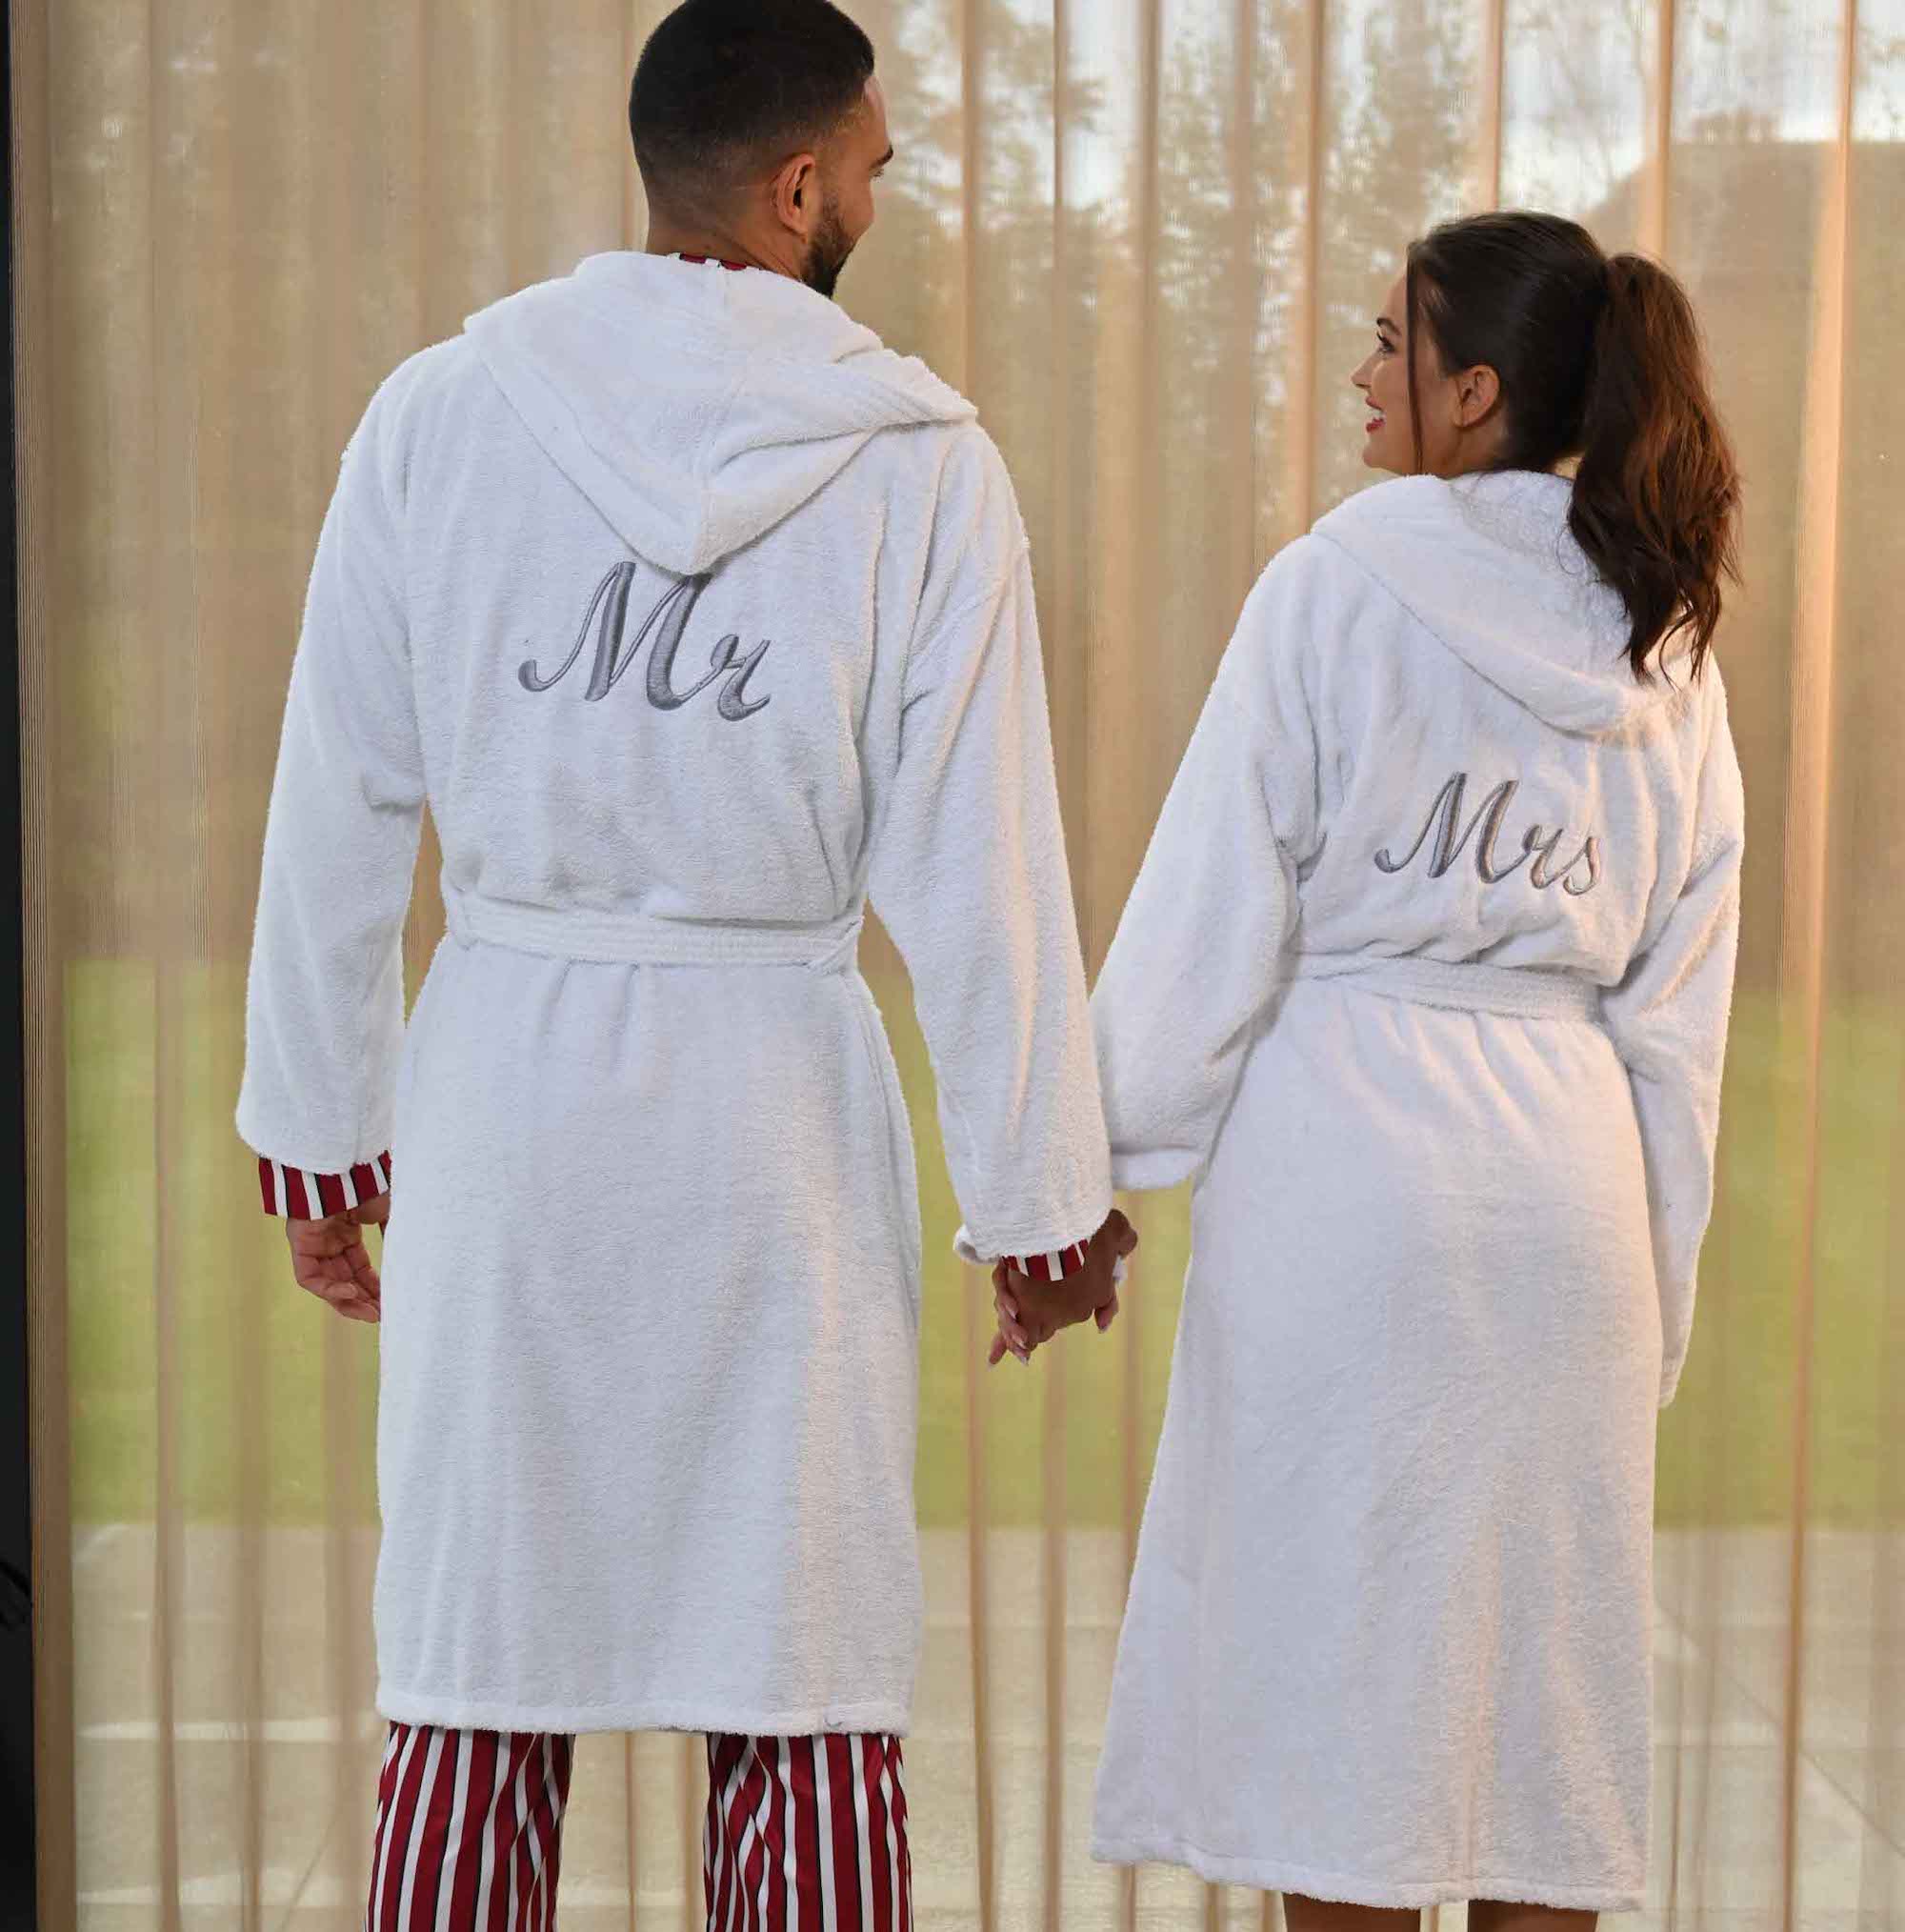 19 Best Bridesmaid & Bride Dressing Gown for Your Wedding Morning -  hitched.co.uk - hitched.co.uk